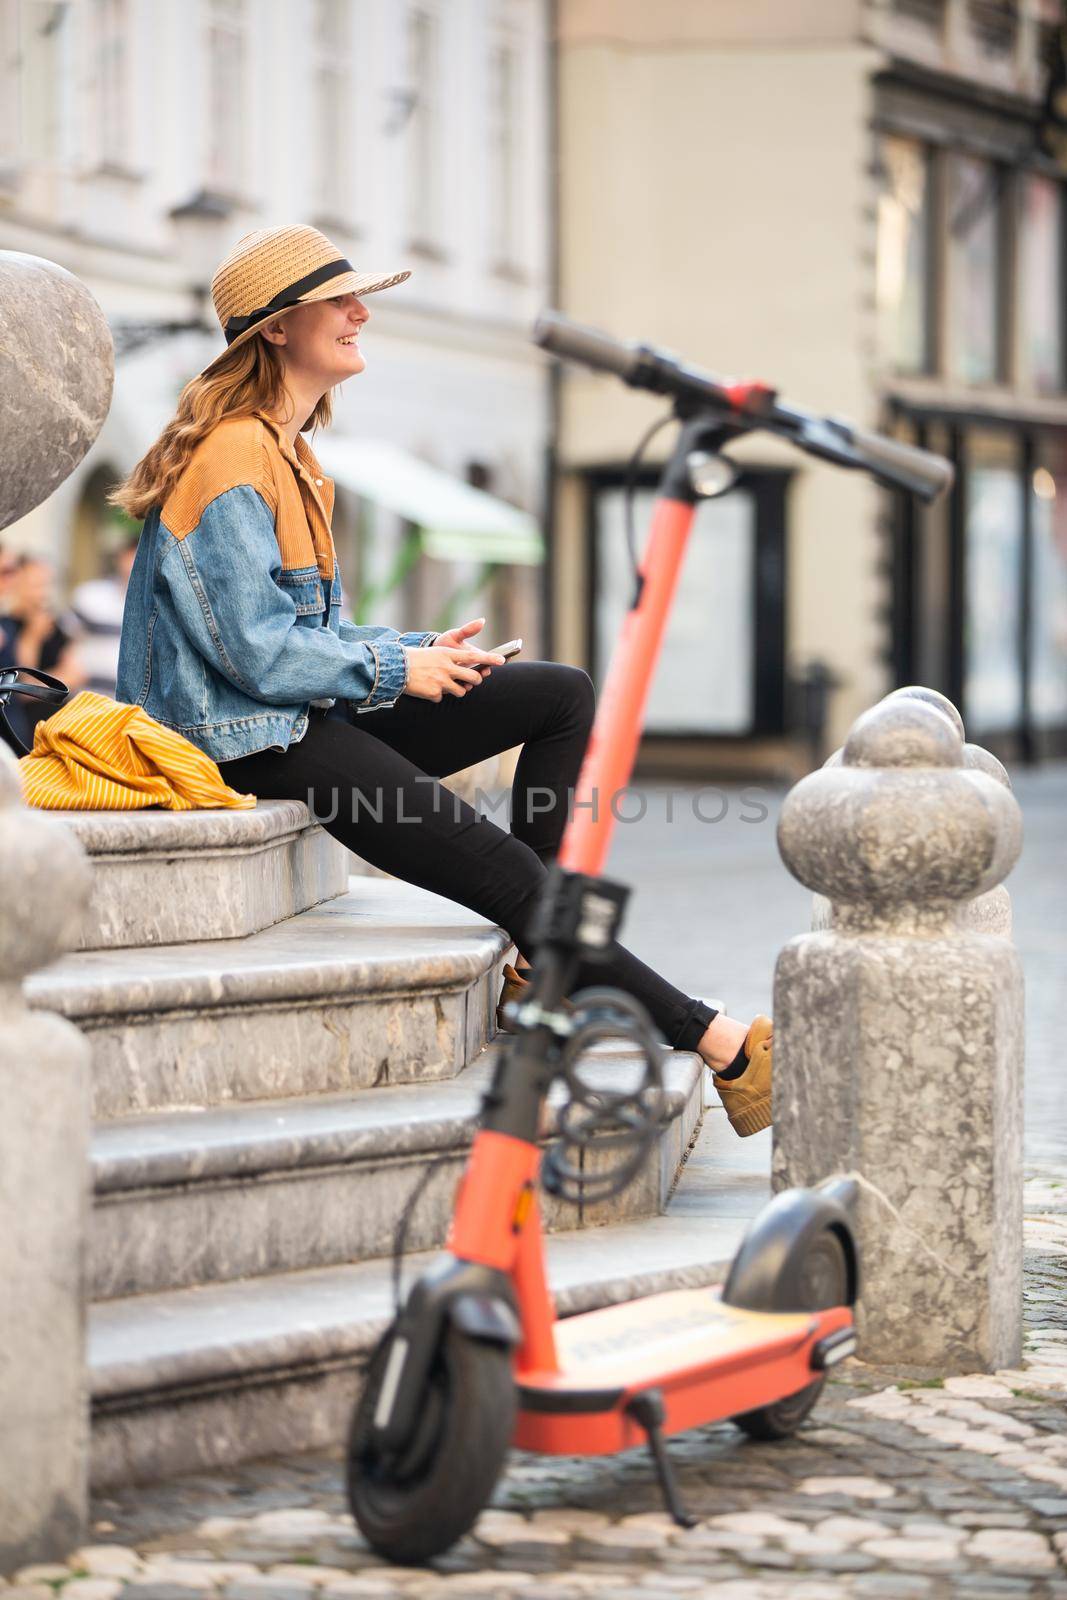 Traveler exploring Ljubljana's old medieval historical city on environmentally friendly electric scooter. Female tourist exploring old city center, sitting and resting on fountains' stairs